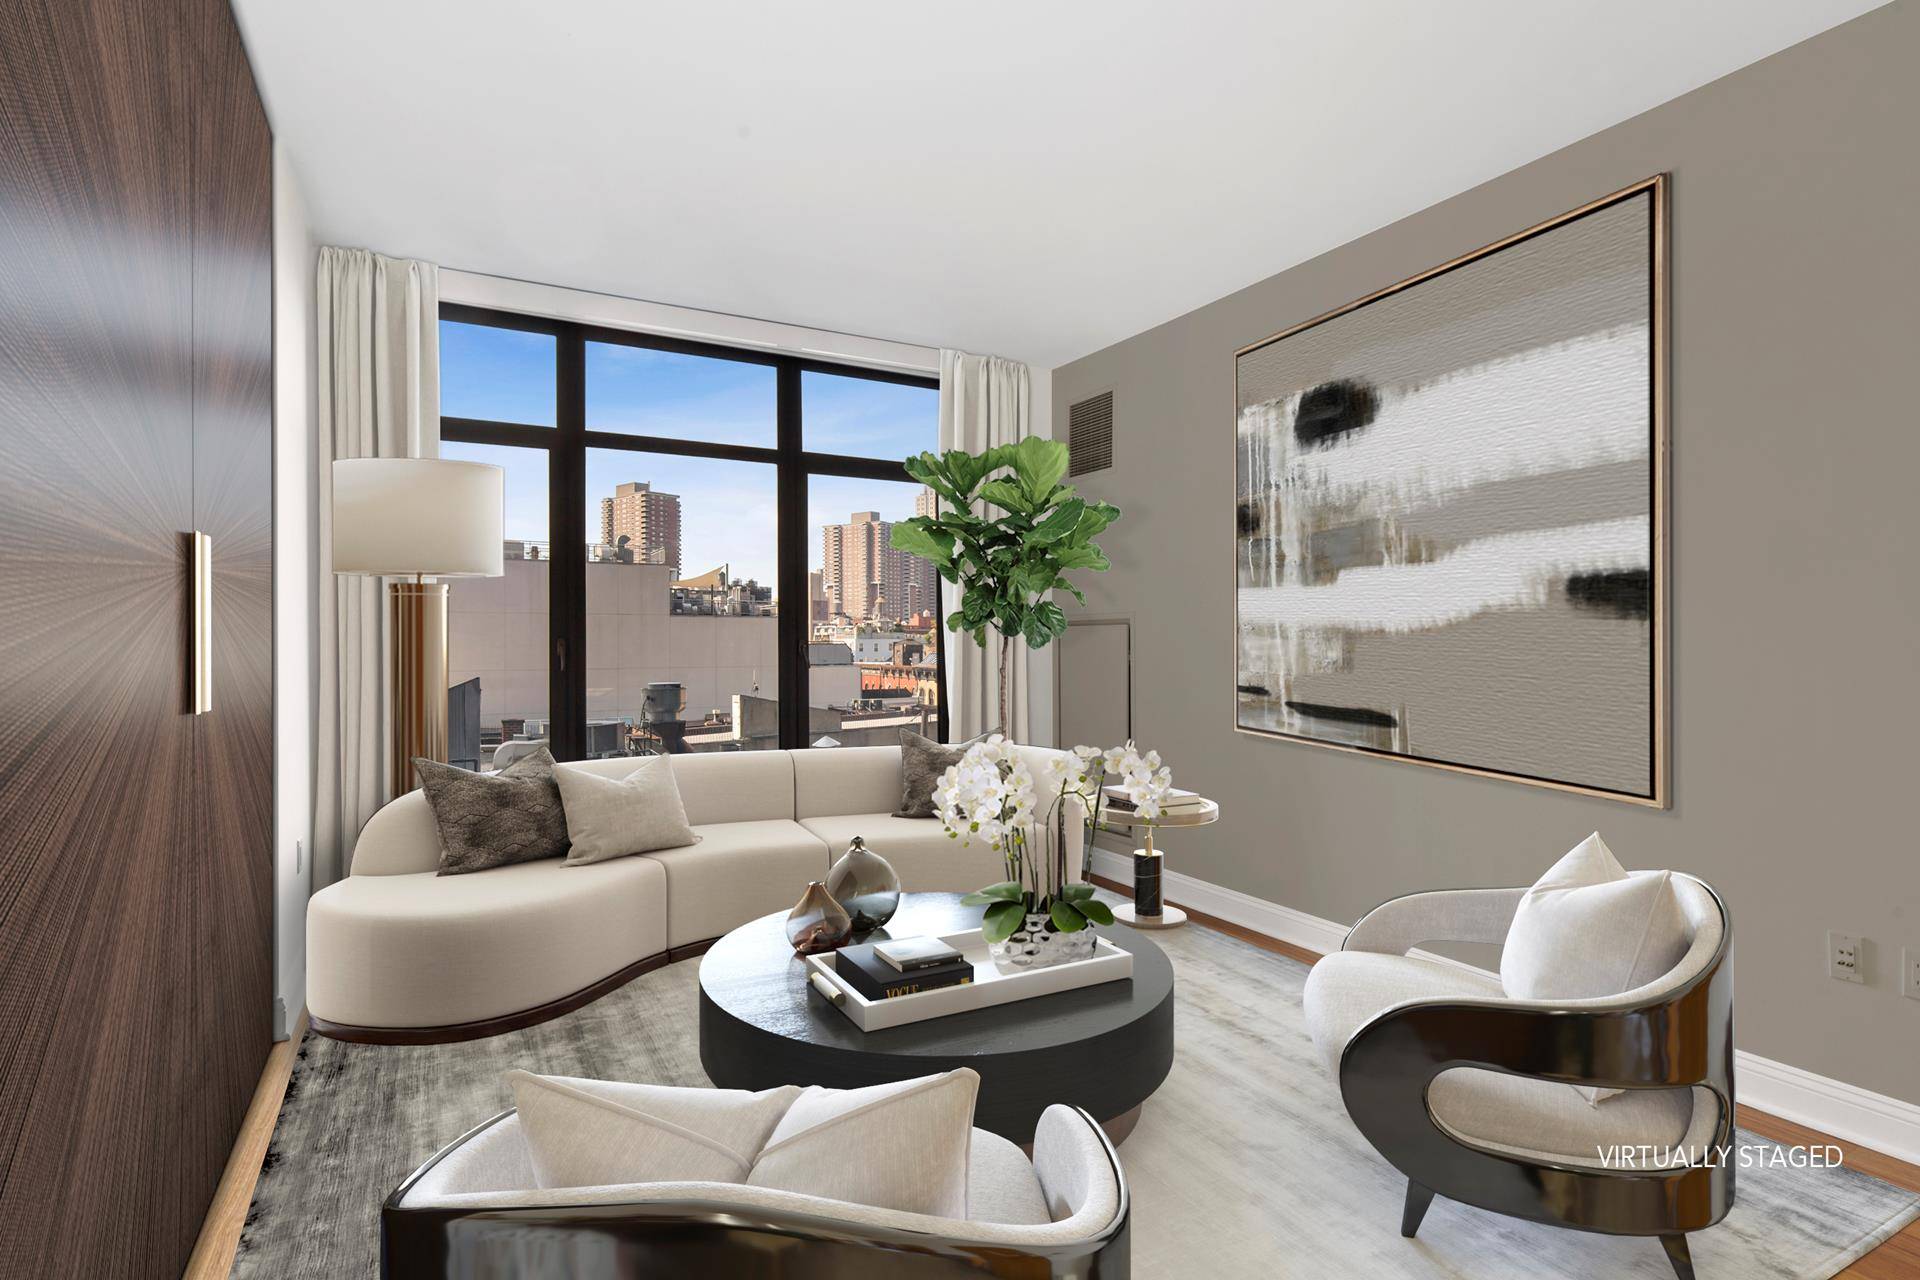 Move right into this large and bright one bedroom home with low monthlies at the full service Tribeca condominium, 57 Reade Street.